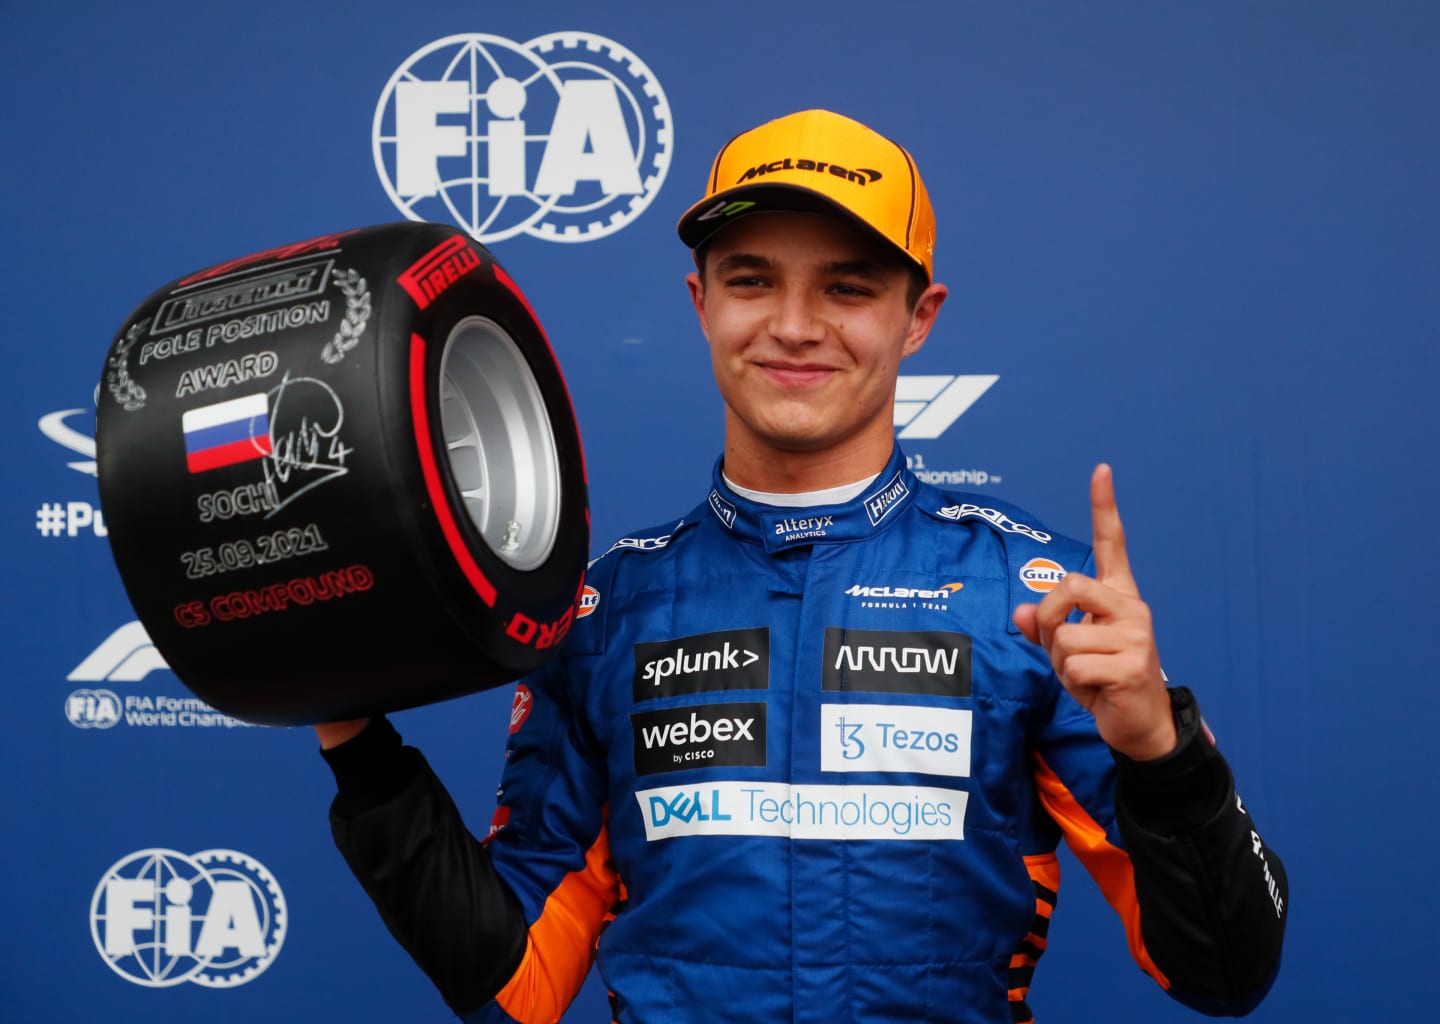 SOCHI, RUSSIA - SEPTEMBER 25: Pole position qualifier Lando Norris of Great Britain and McLaren F1 celebrates in parc ferme during qualifying ahead of the F1 Grand Prix of Russia at Sochi Autodrom on September 25, 2021 in Sochi, Russia. (Photo by Yuri Kochetkov - Pool/Getty Images)